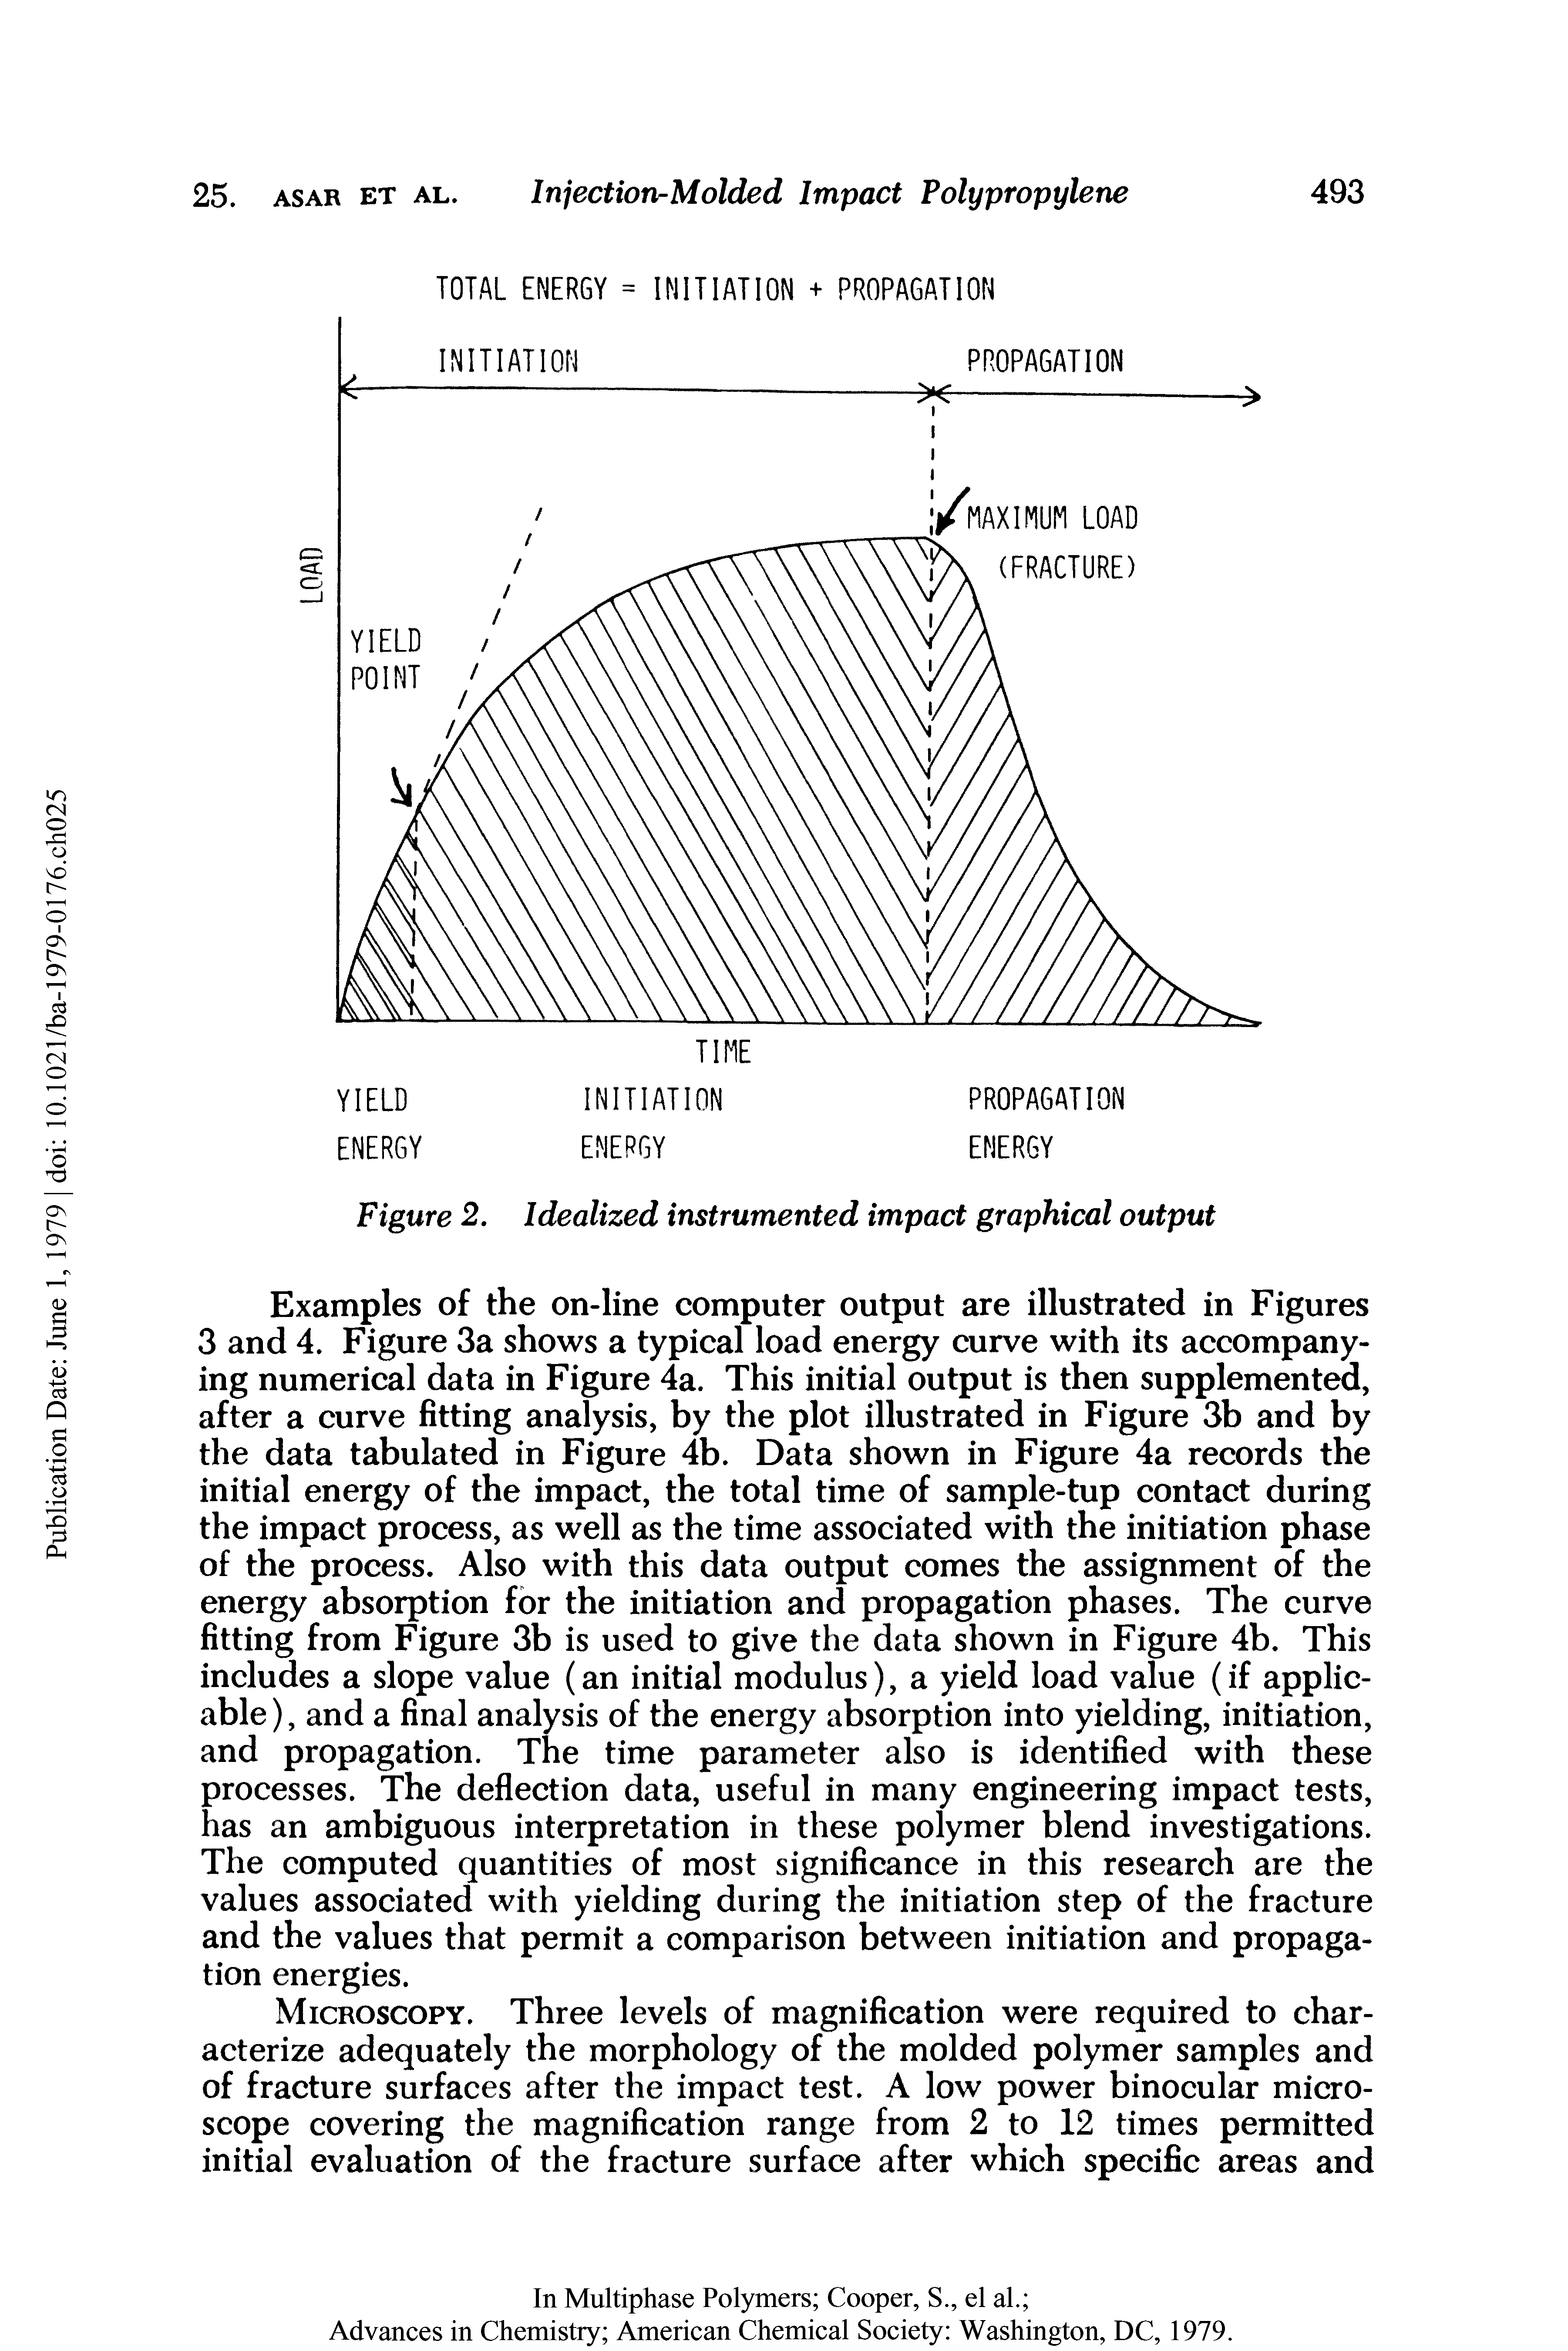 Figure 2. Idealized instrumented impact graphical output...